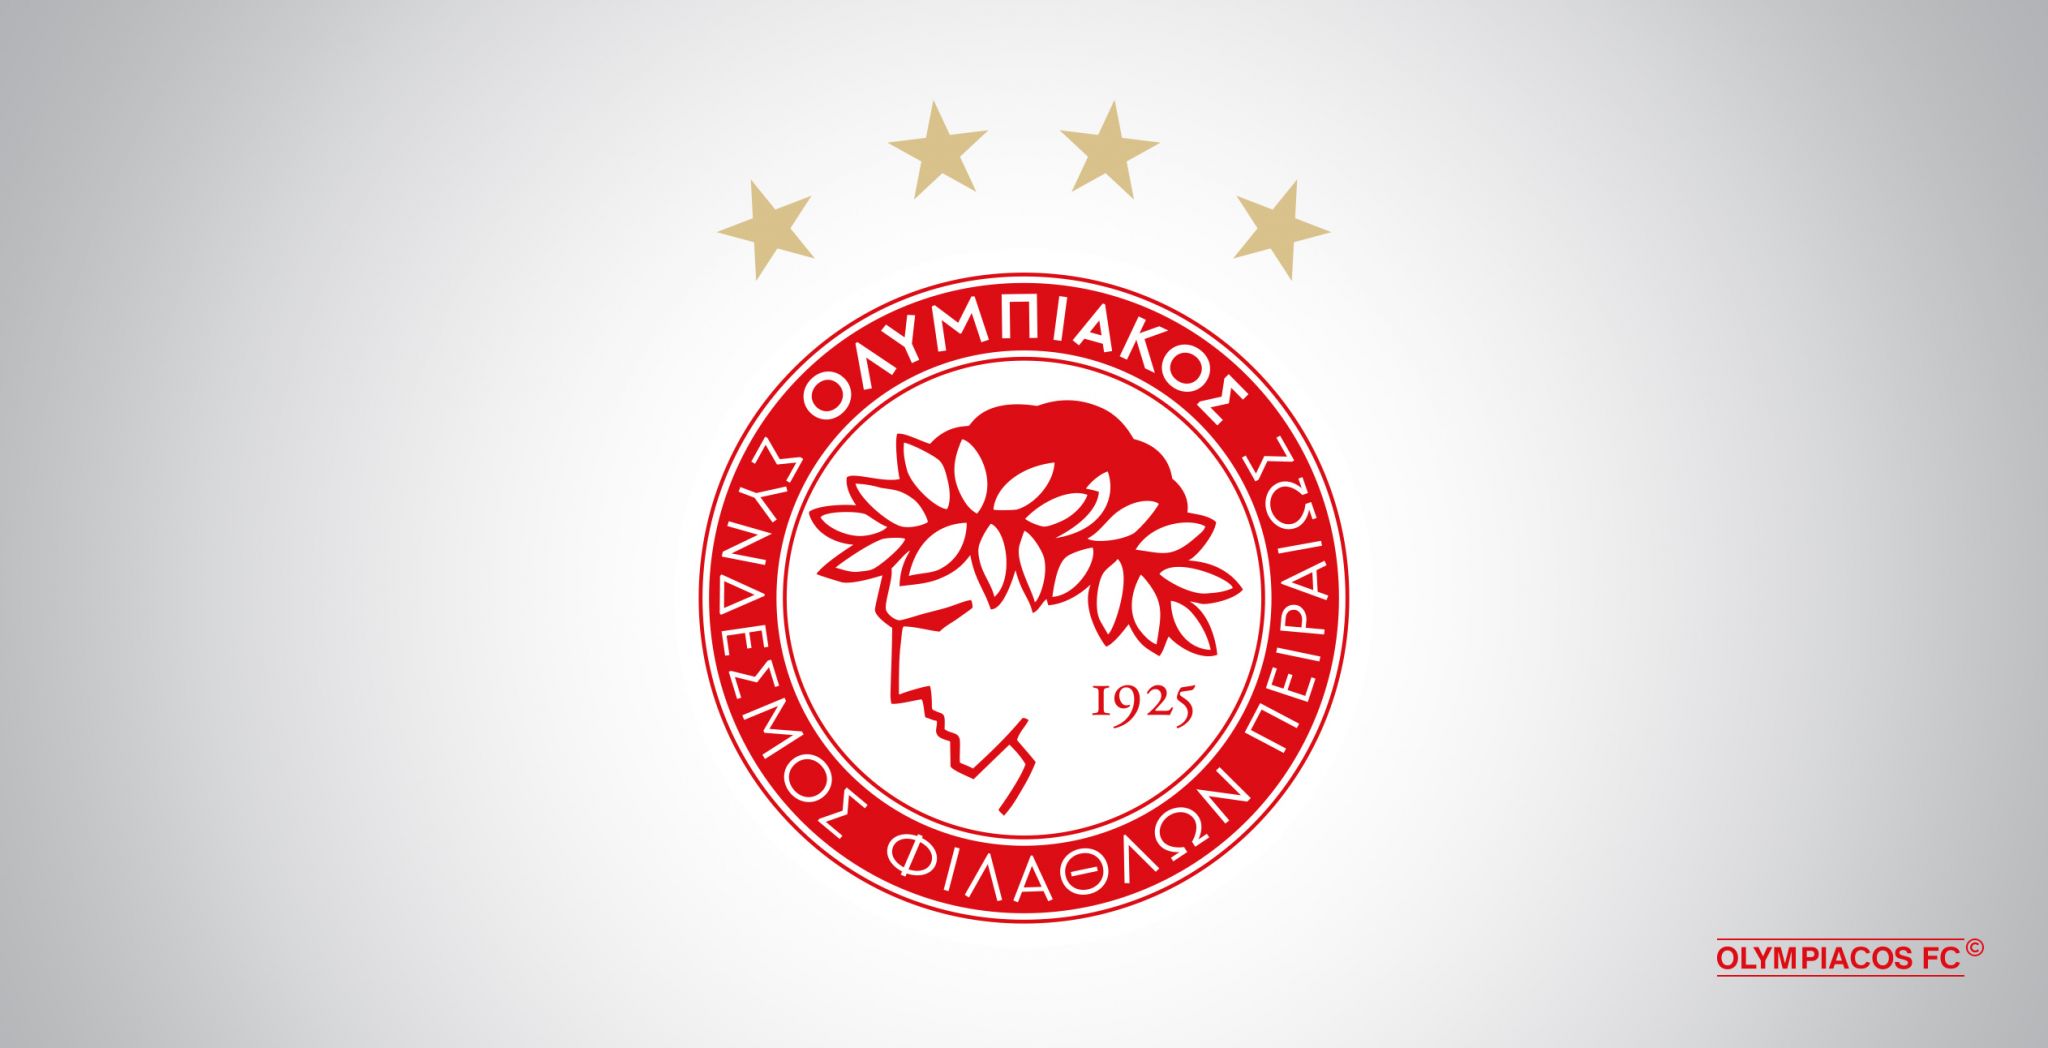 Olympiacos FC Press release